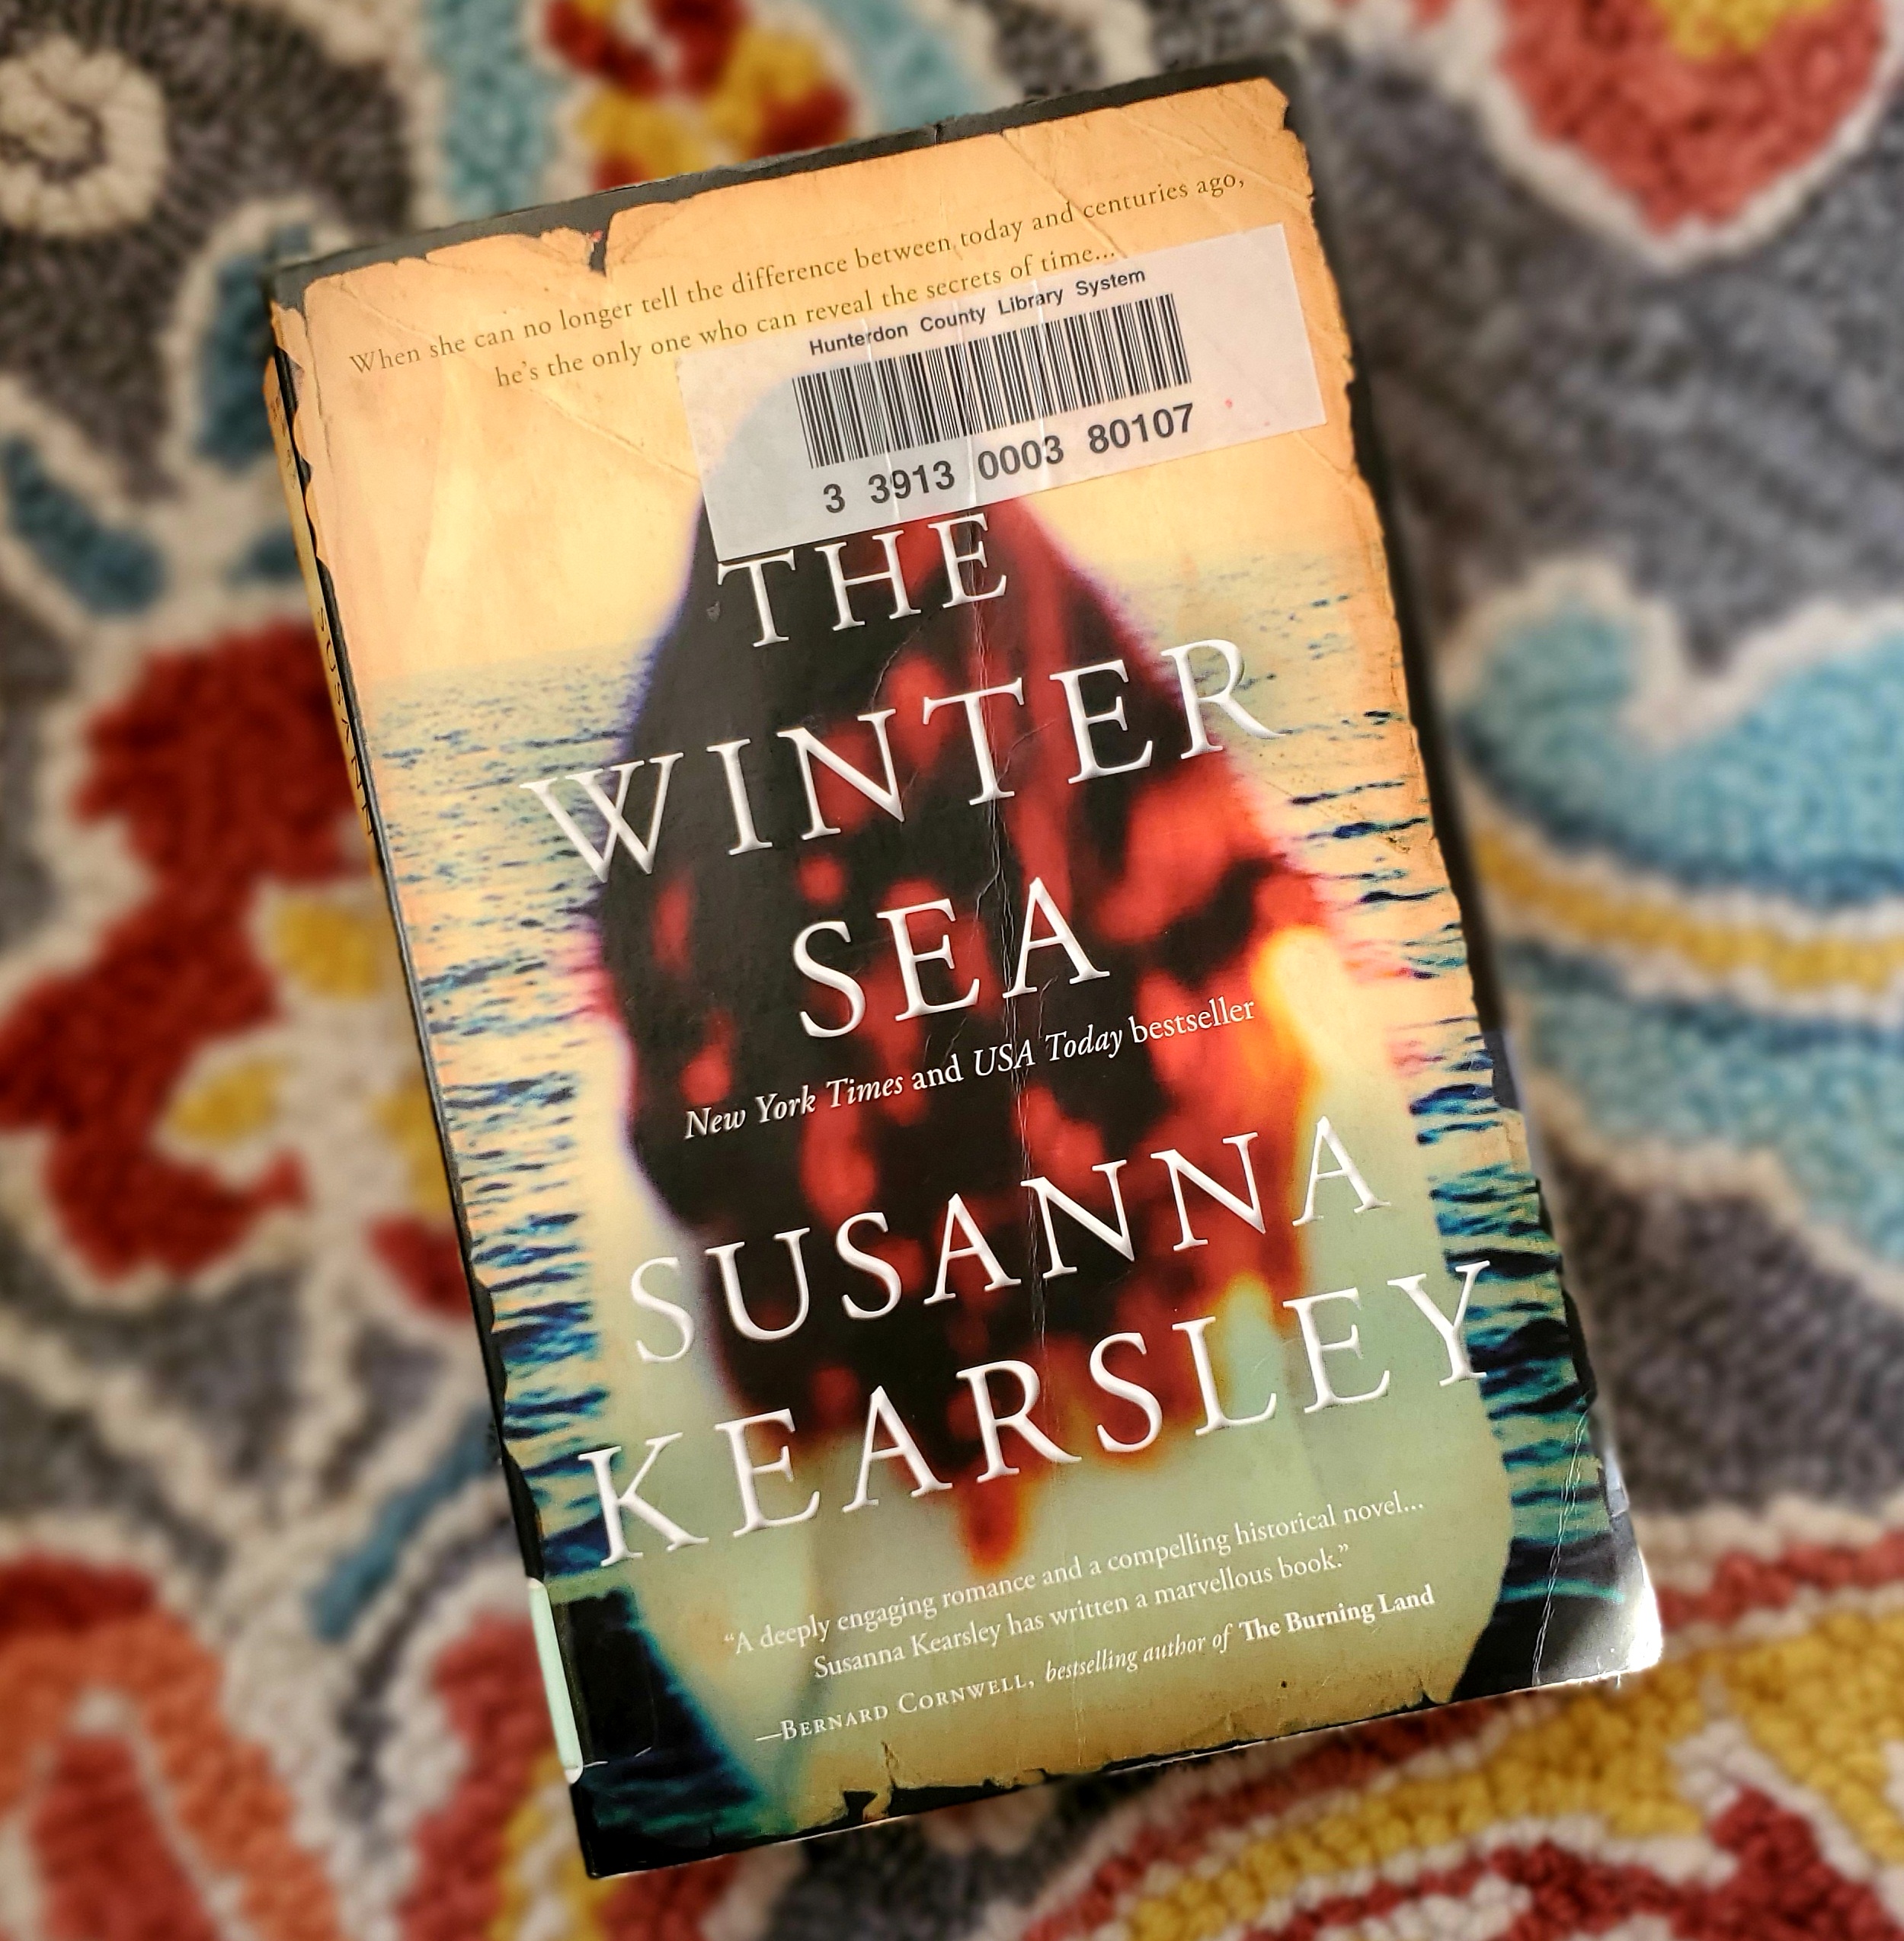 Book Review of THE WINTER SEA